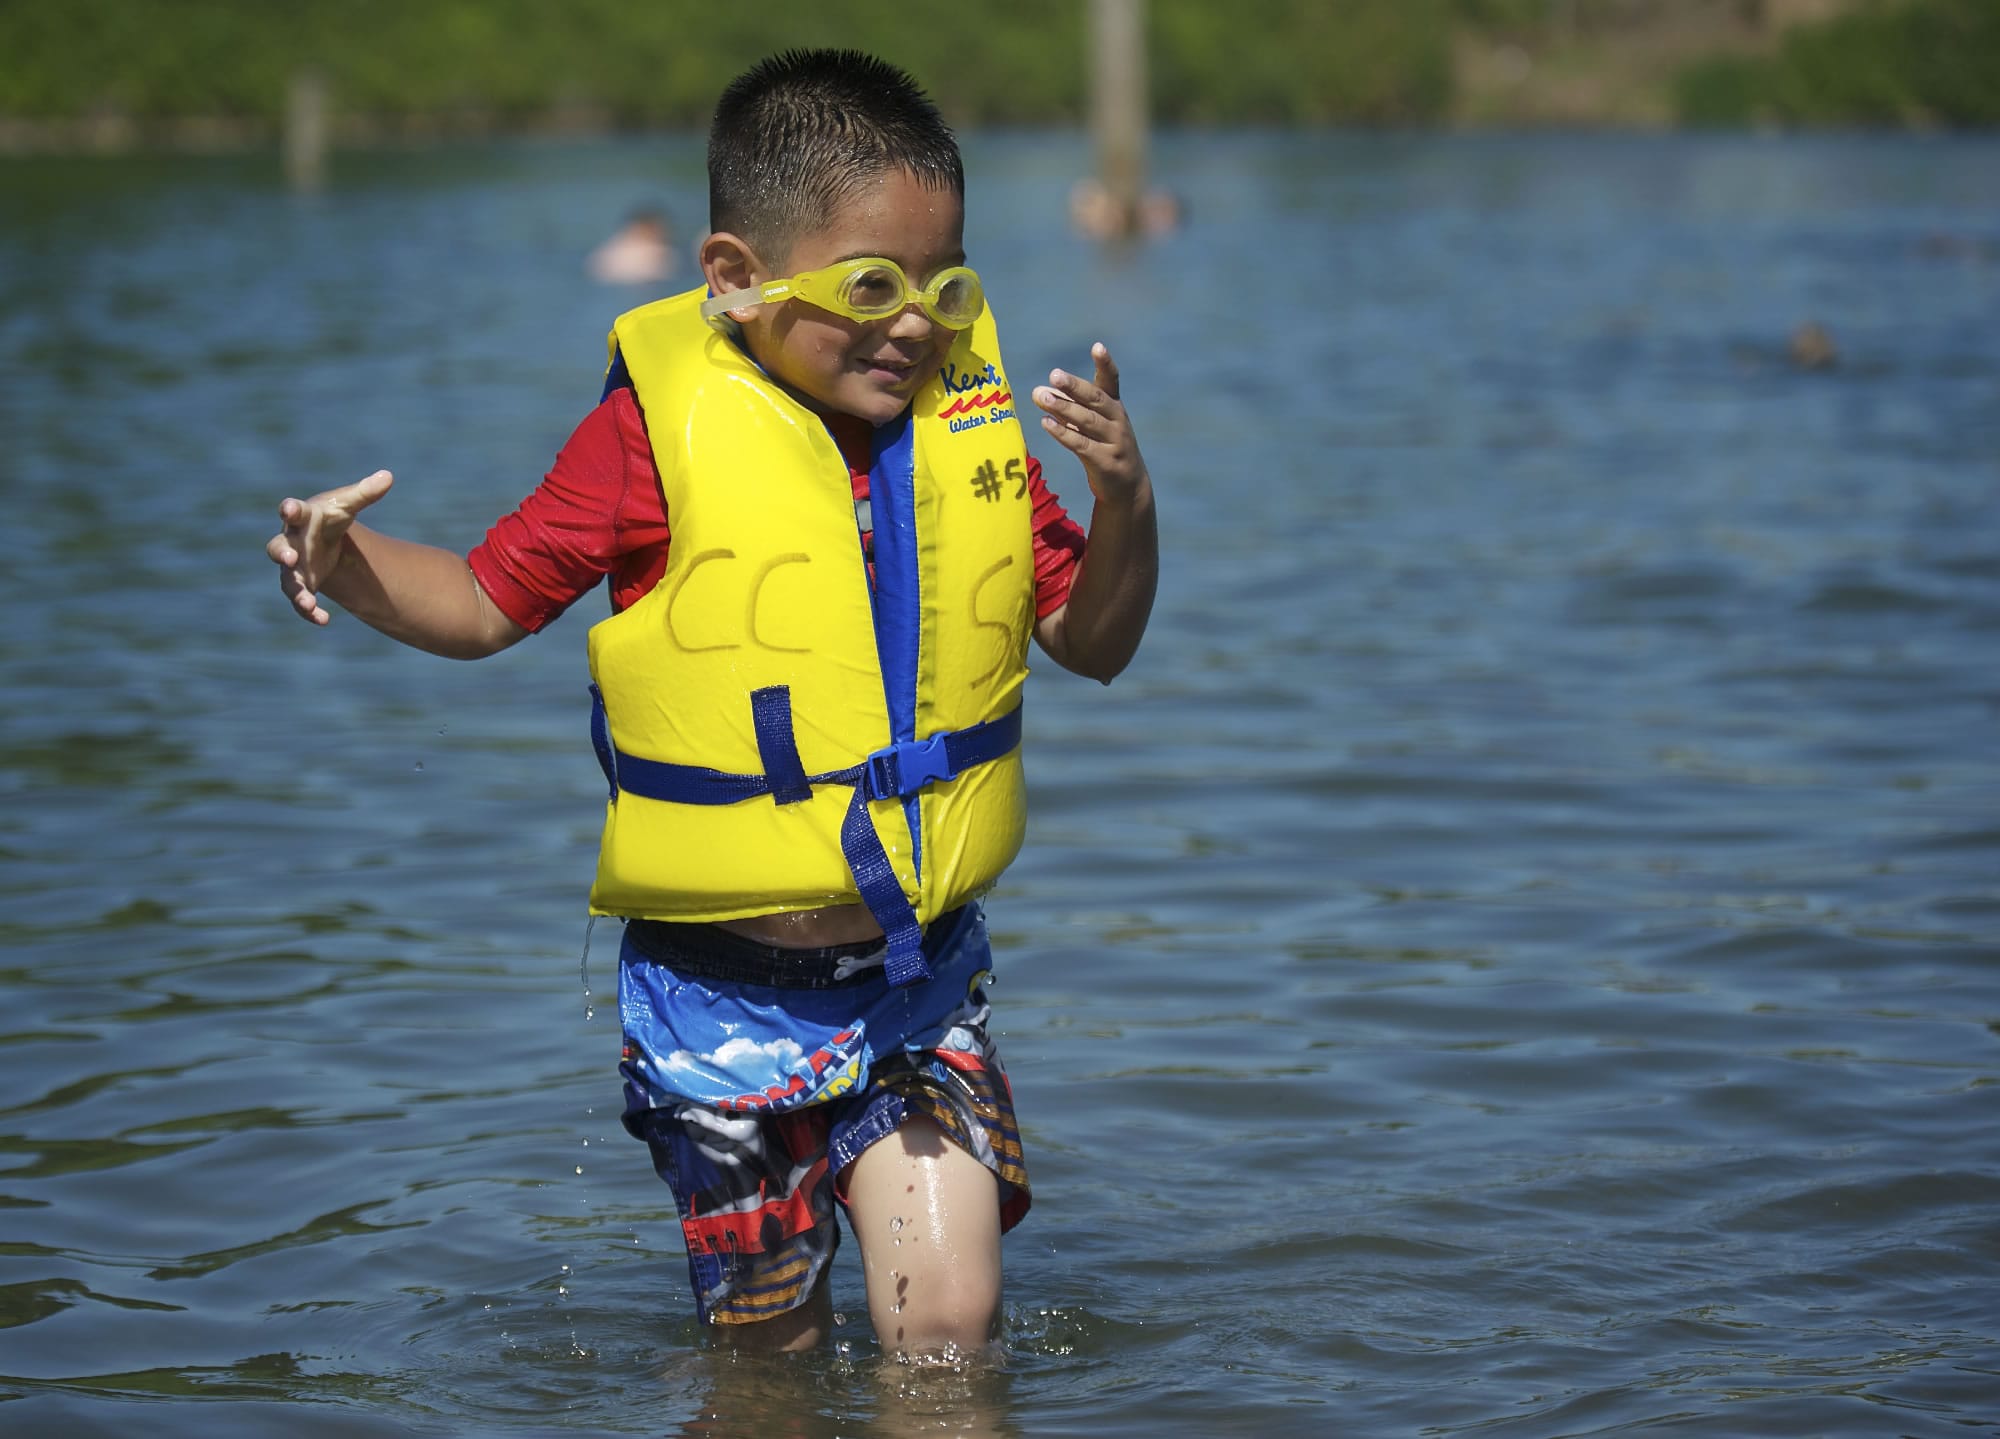 Esteban Cervantes, 4, of Vancouver wears a life jacket Friday at Klineline Pond. The popular swimming site hasn't had lifeguards since budget cuts in 2009, but beginning this week, about a dozen life jackets in a full range of sizes are available to borrow.